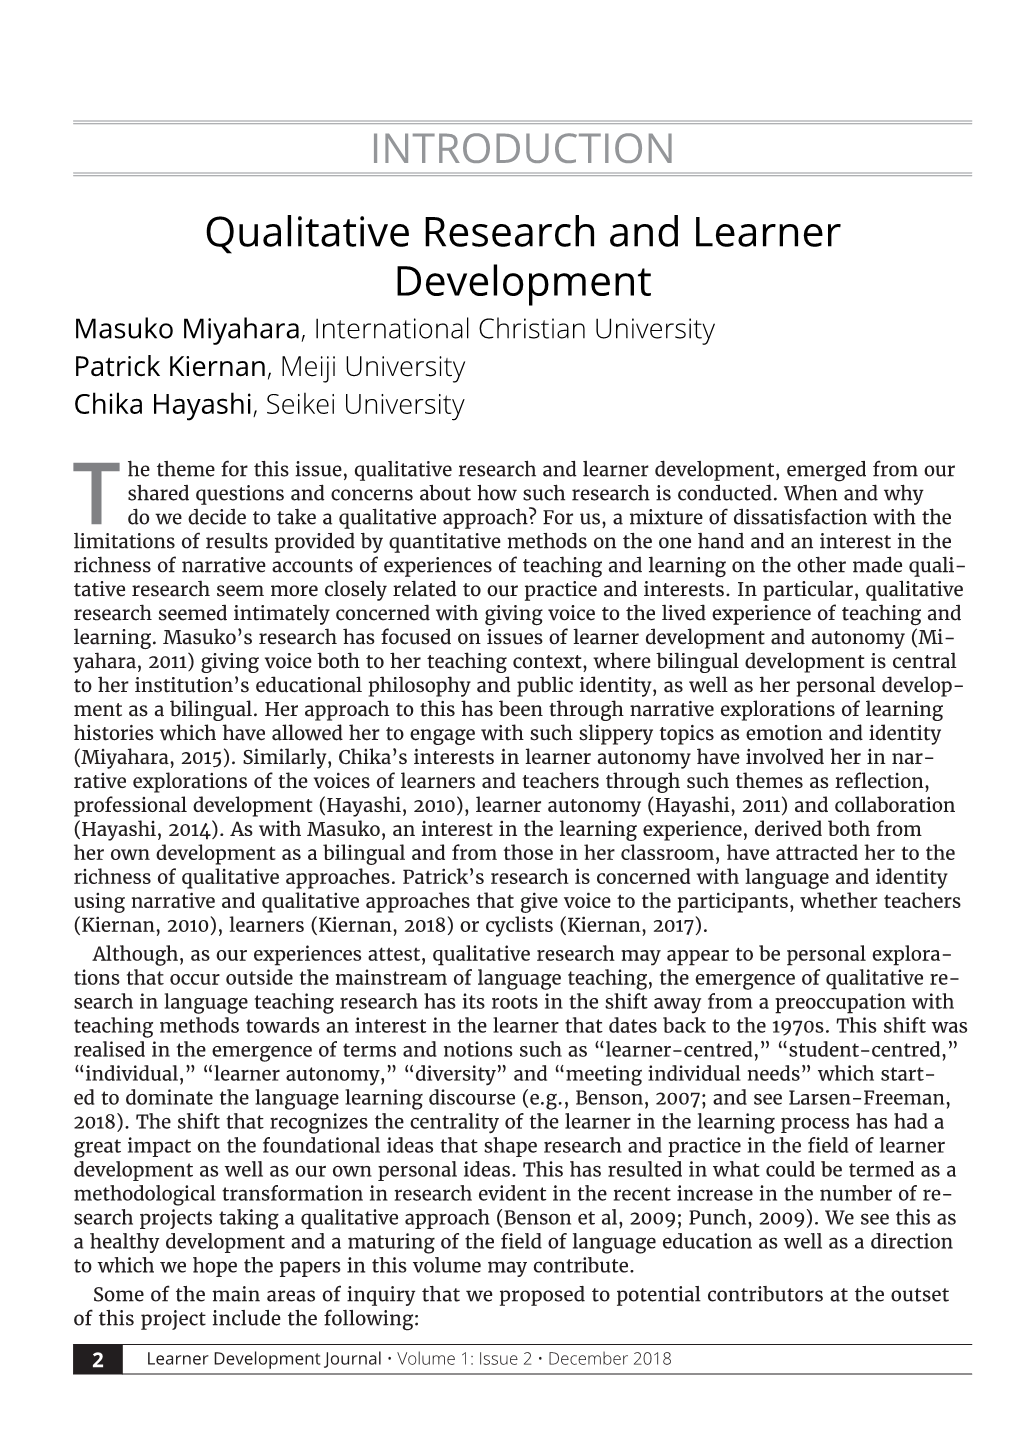 INTRODUCTION Qualitative Research and Learner Development